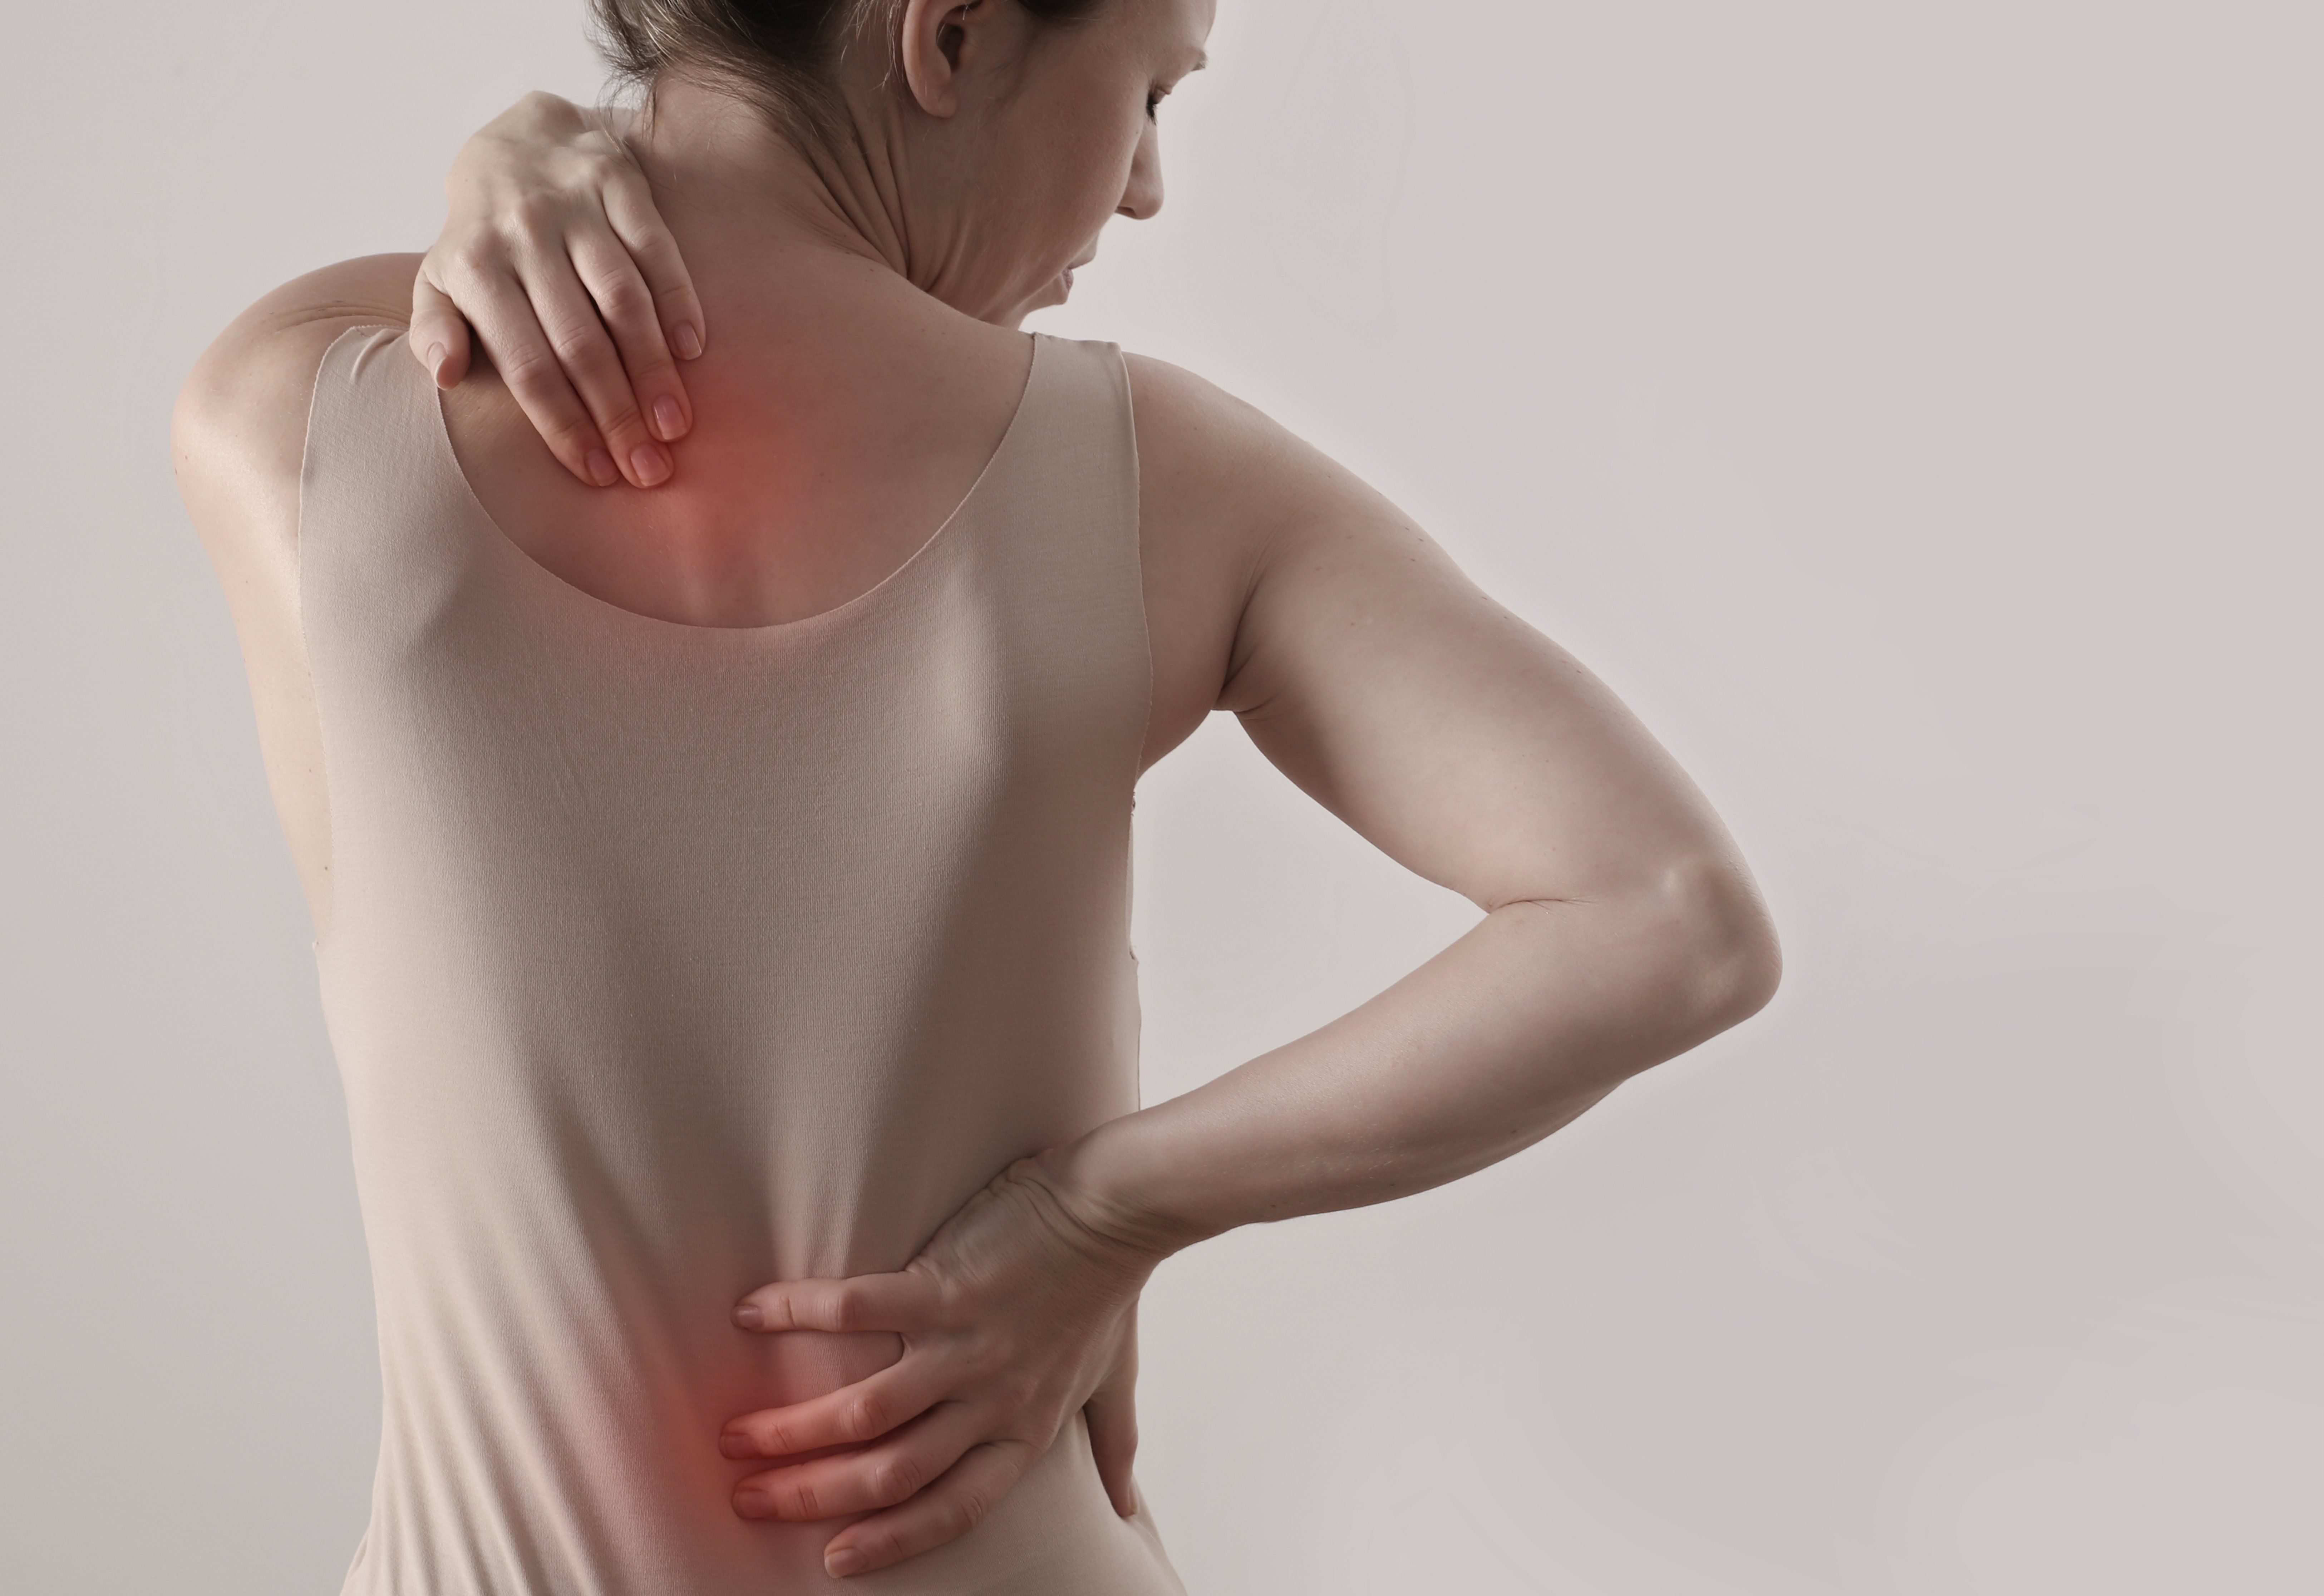 5 Problems a Misaligned Spine Can Cause